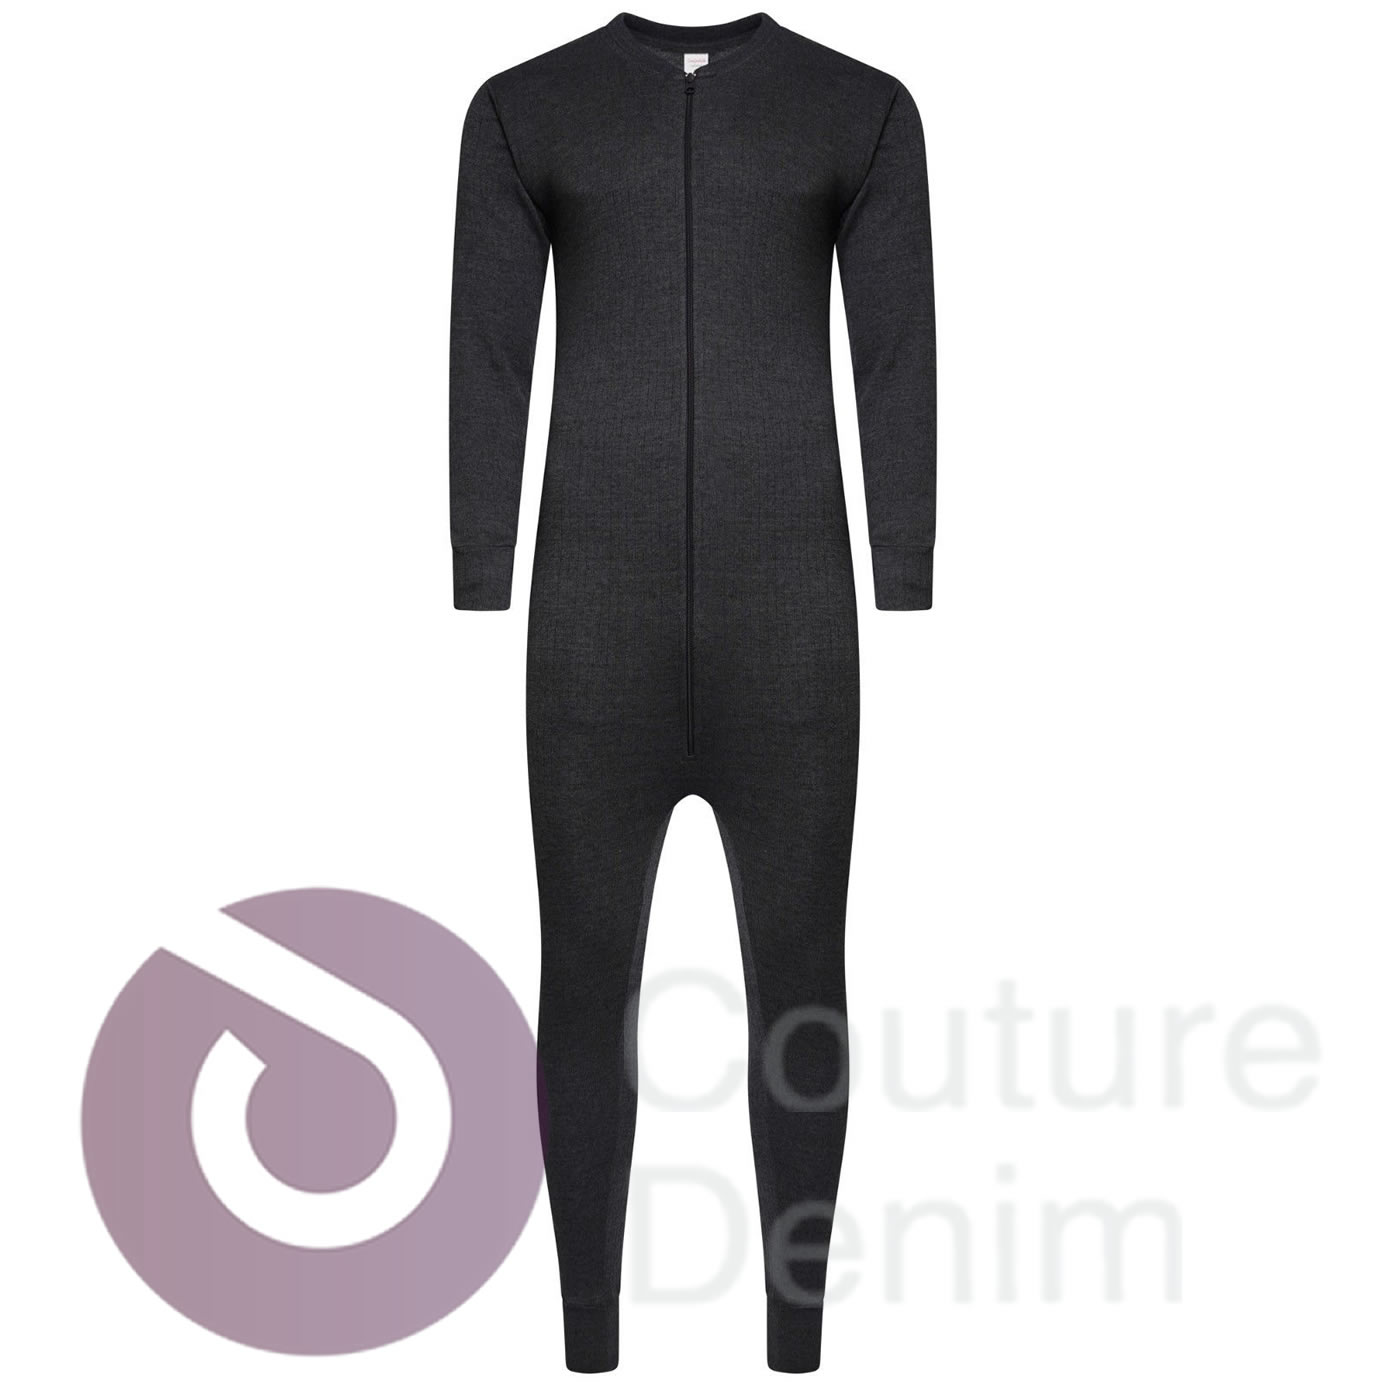 FLOSO Mens Thermal Underwear All In One Union Suit 